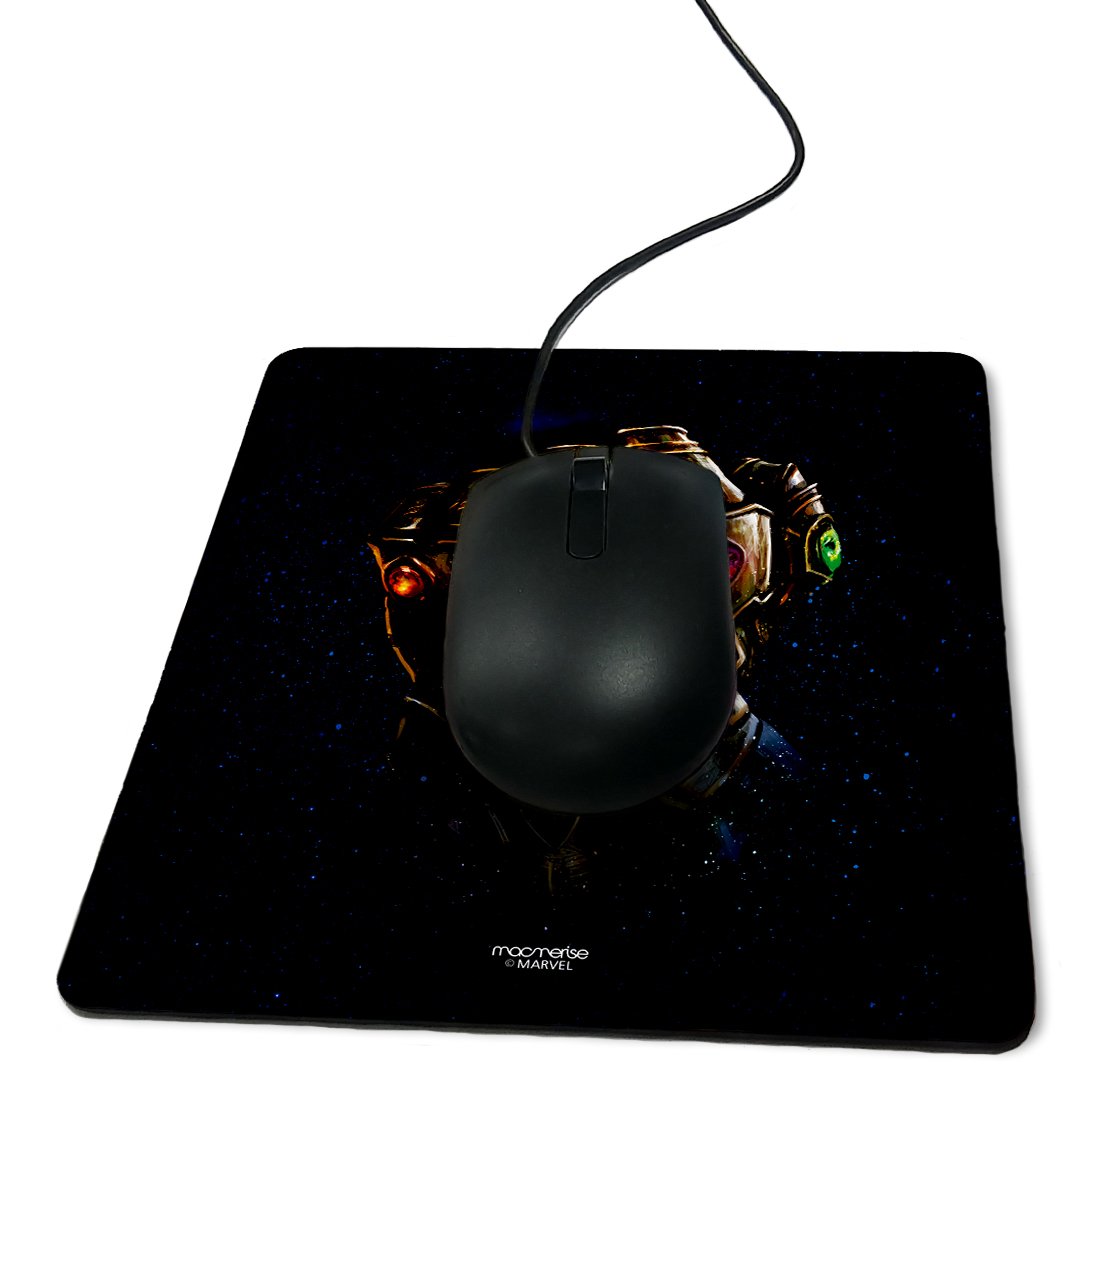 The Gauntlet Punch - Mouse Pad by Macmerise -Macmerise - India - www.superherotoystore.com